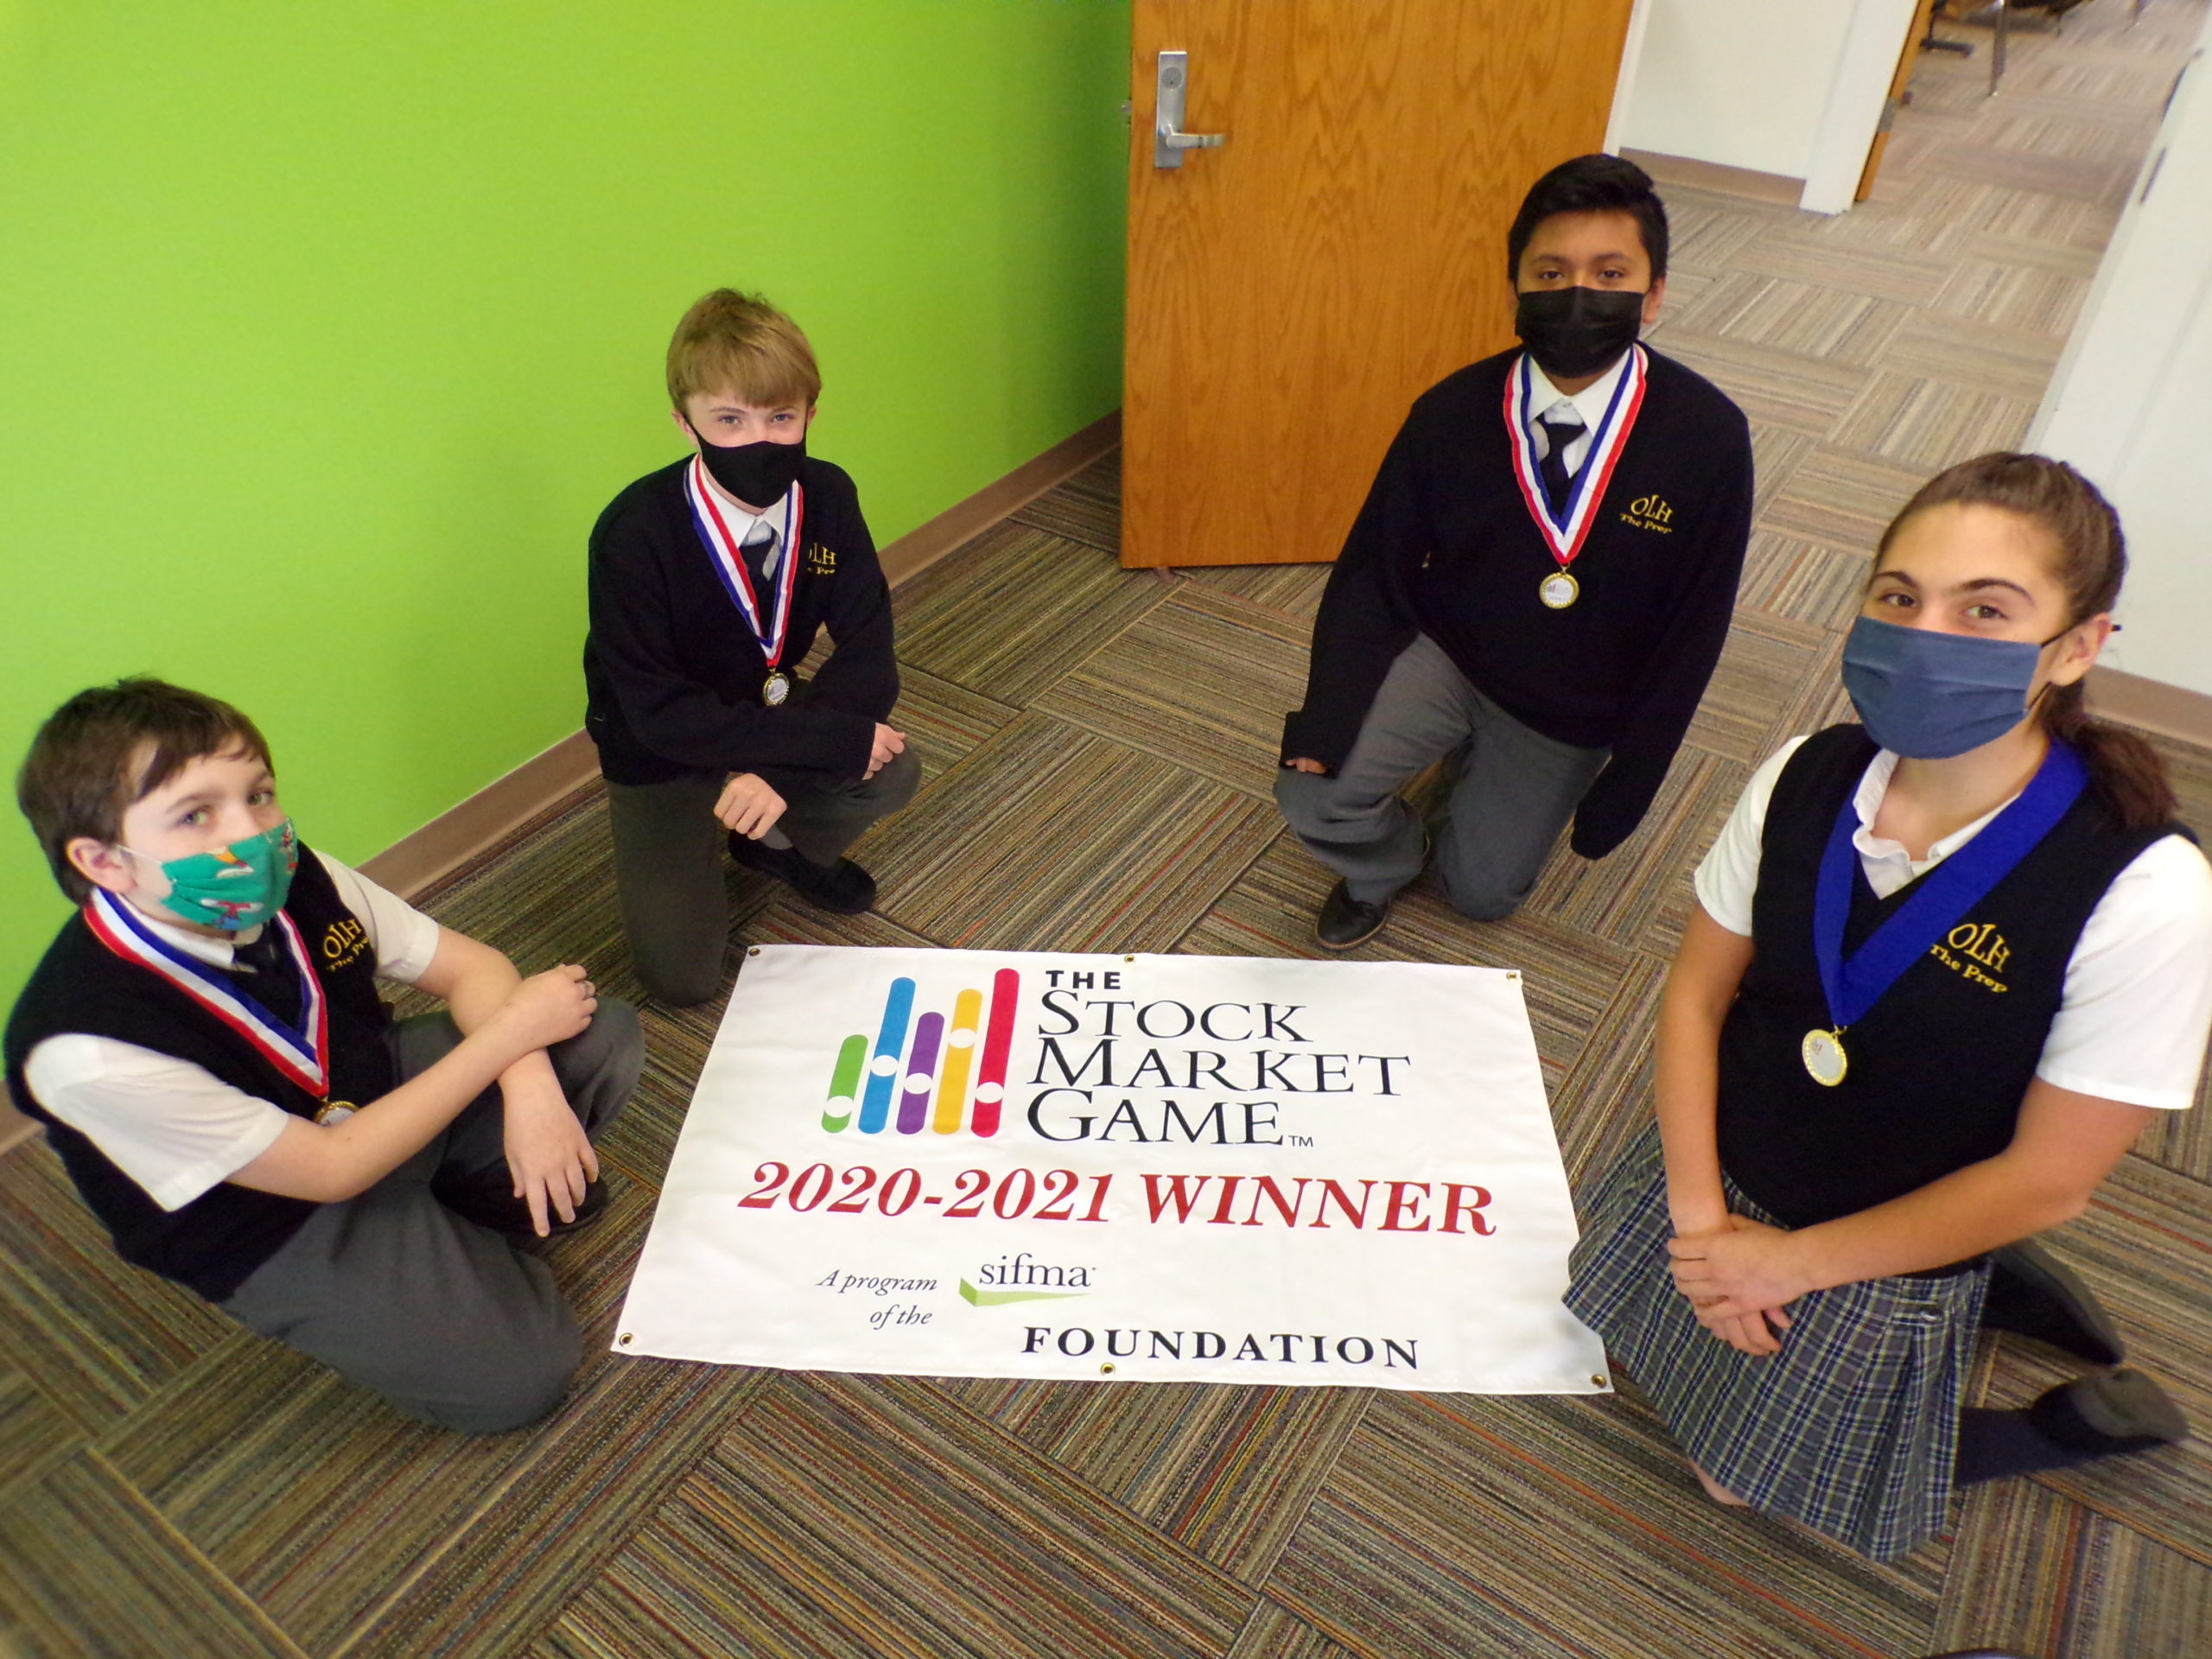 (From left to right) Luke David, George McDonald, Jake Morales and Maxine Boeding. Maxine placed first place in the SIFMA Foundation’s Stock Market Game, with the rest of the students taking a second place award.